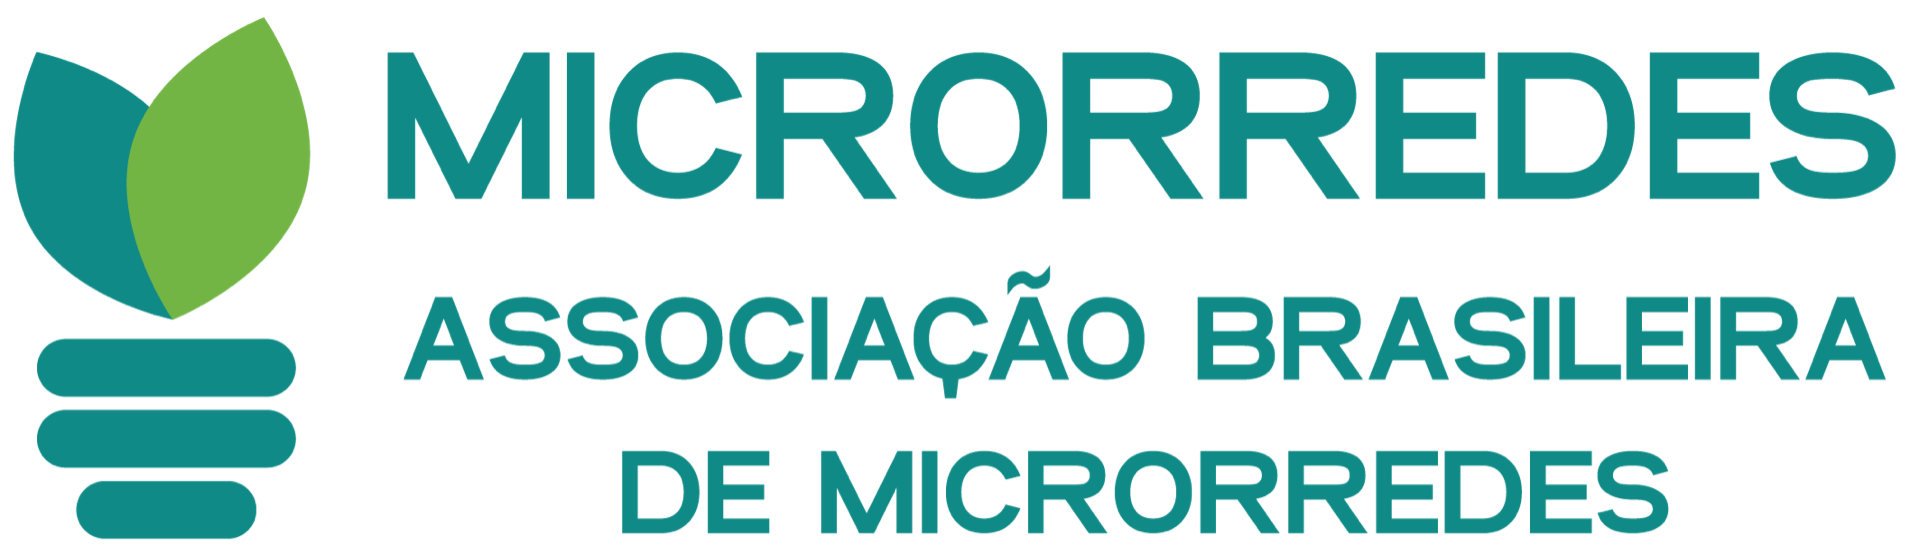 microrredes-abmr-logo.687abb69.png